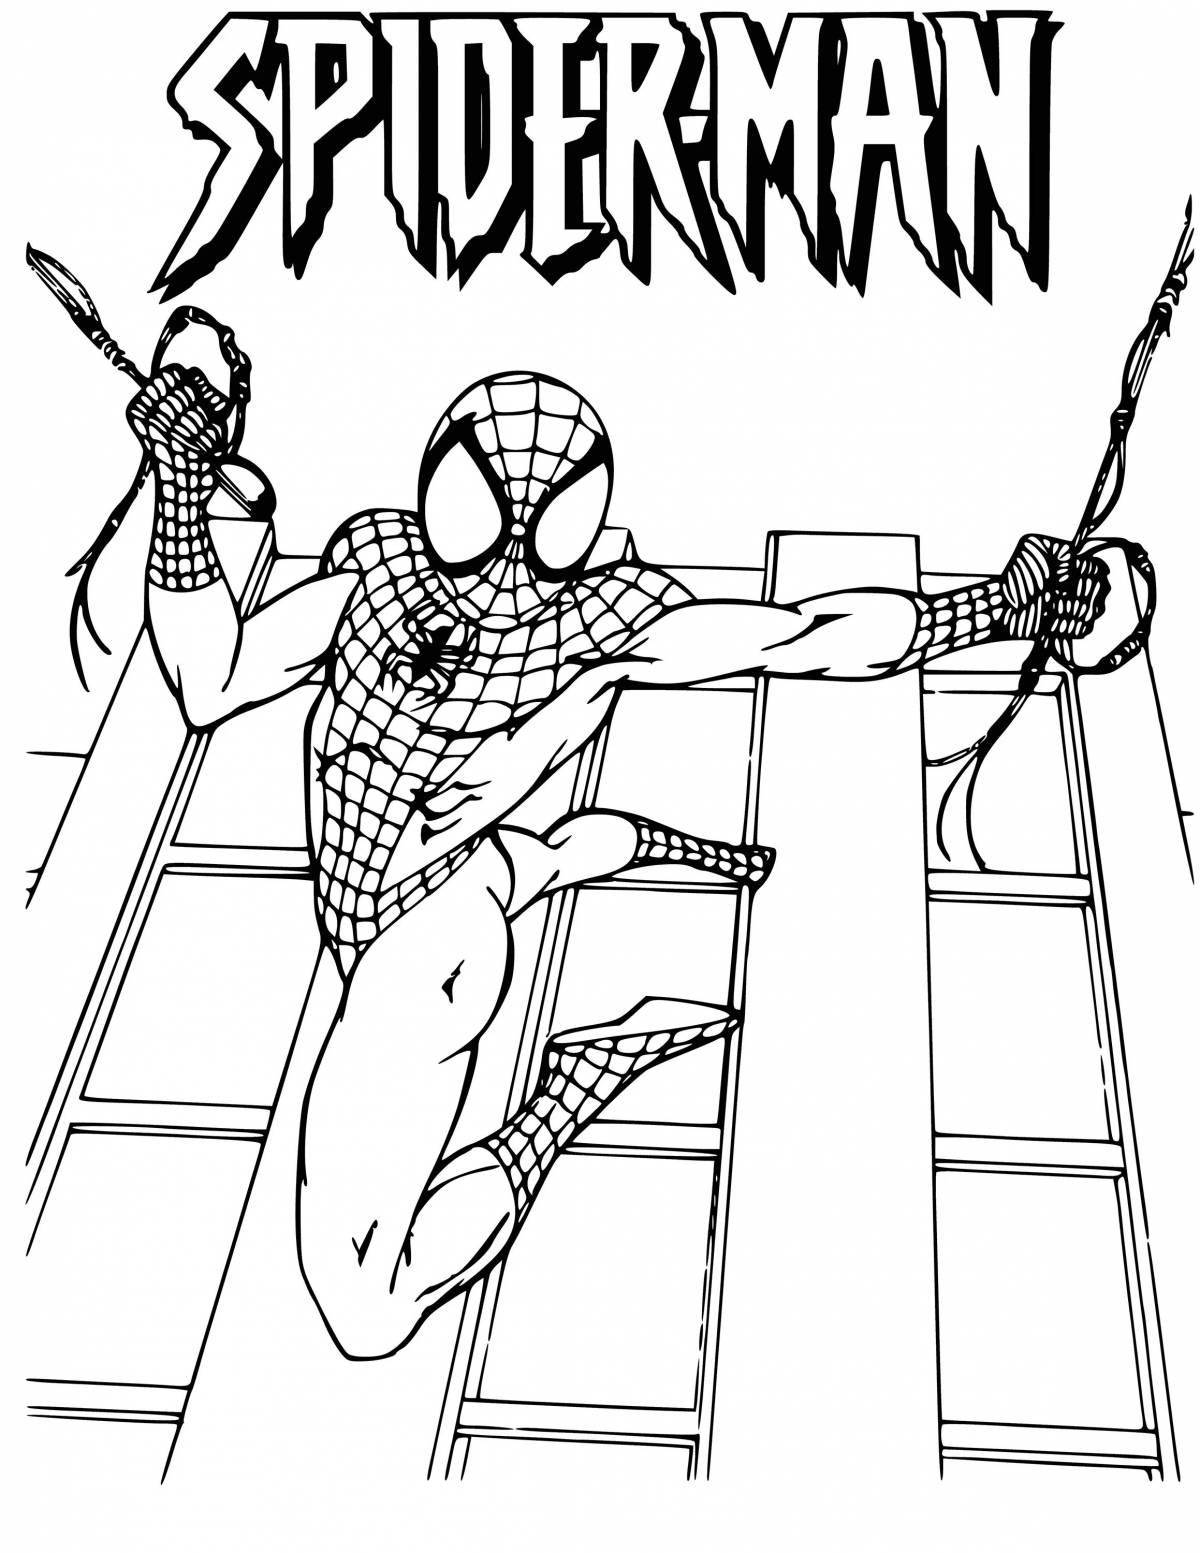 Radiant coloring page spider-man with claws